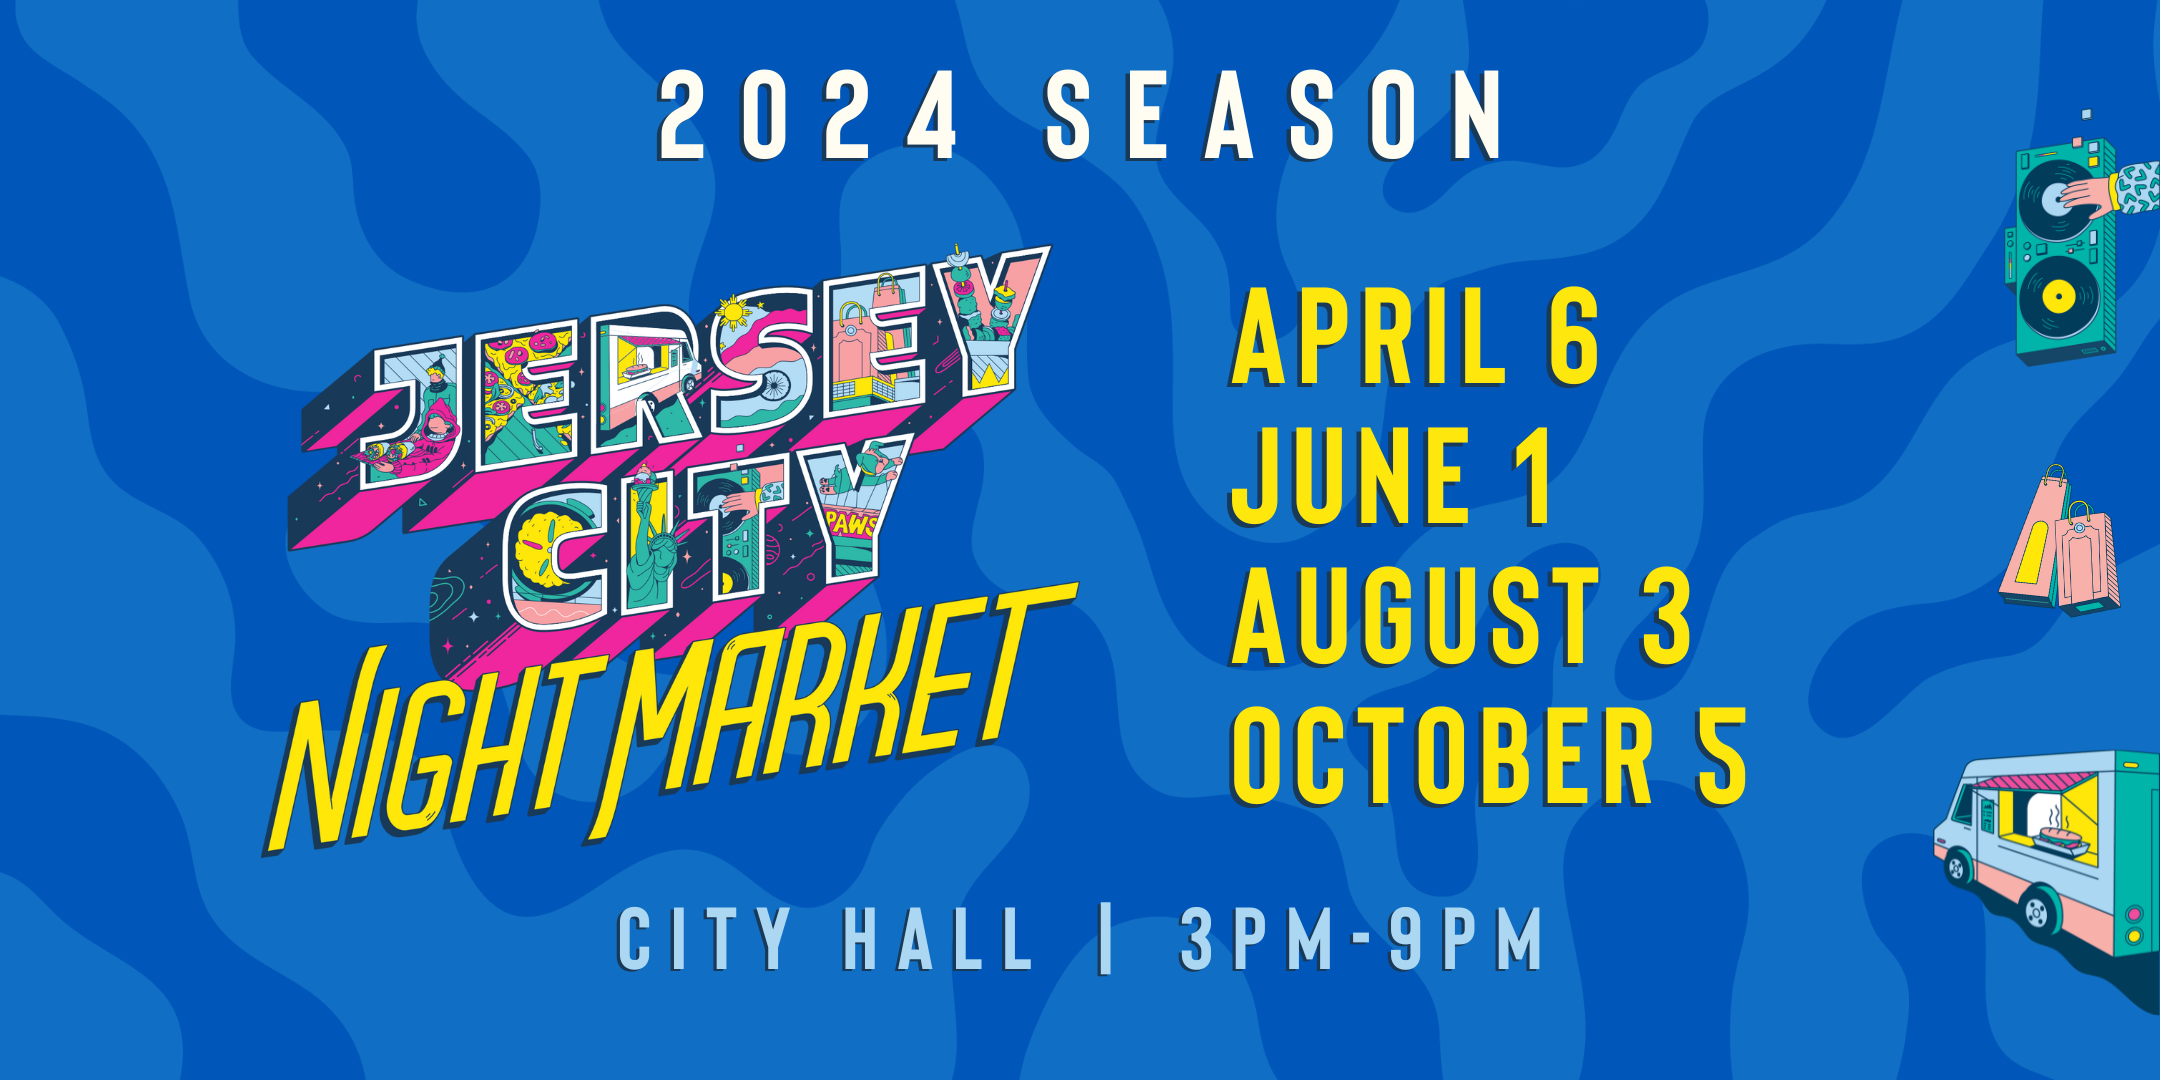 JERSEY CITY NIGHT MARKET APRIL 6TH AT CITY HALL PARKING LOT FROM 3PM TO 9PM